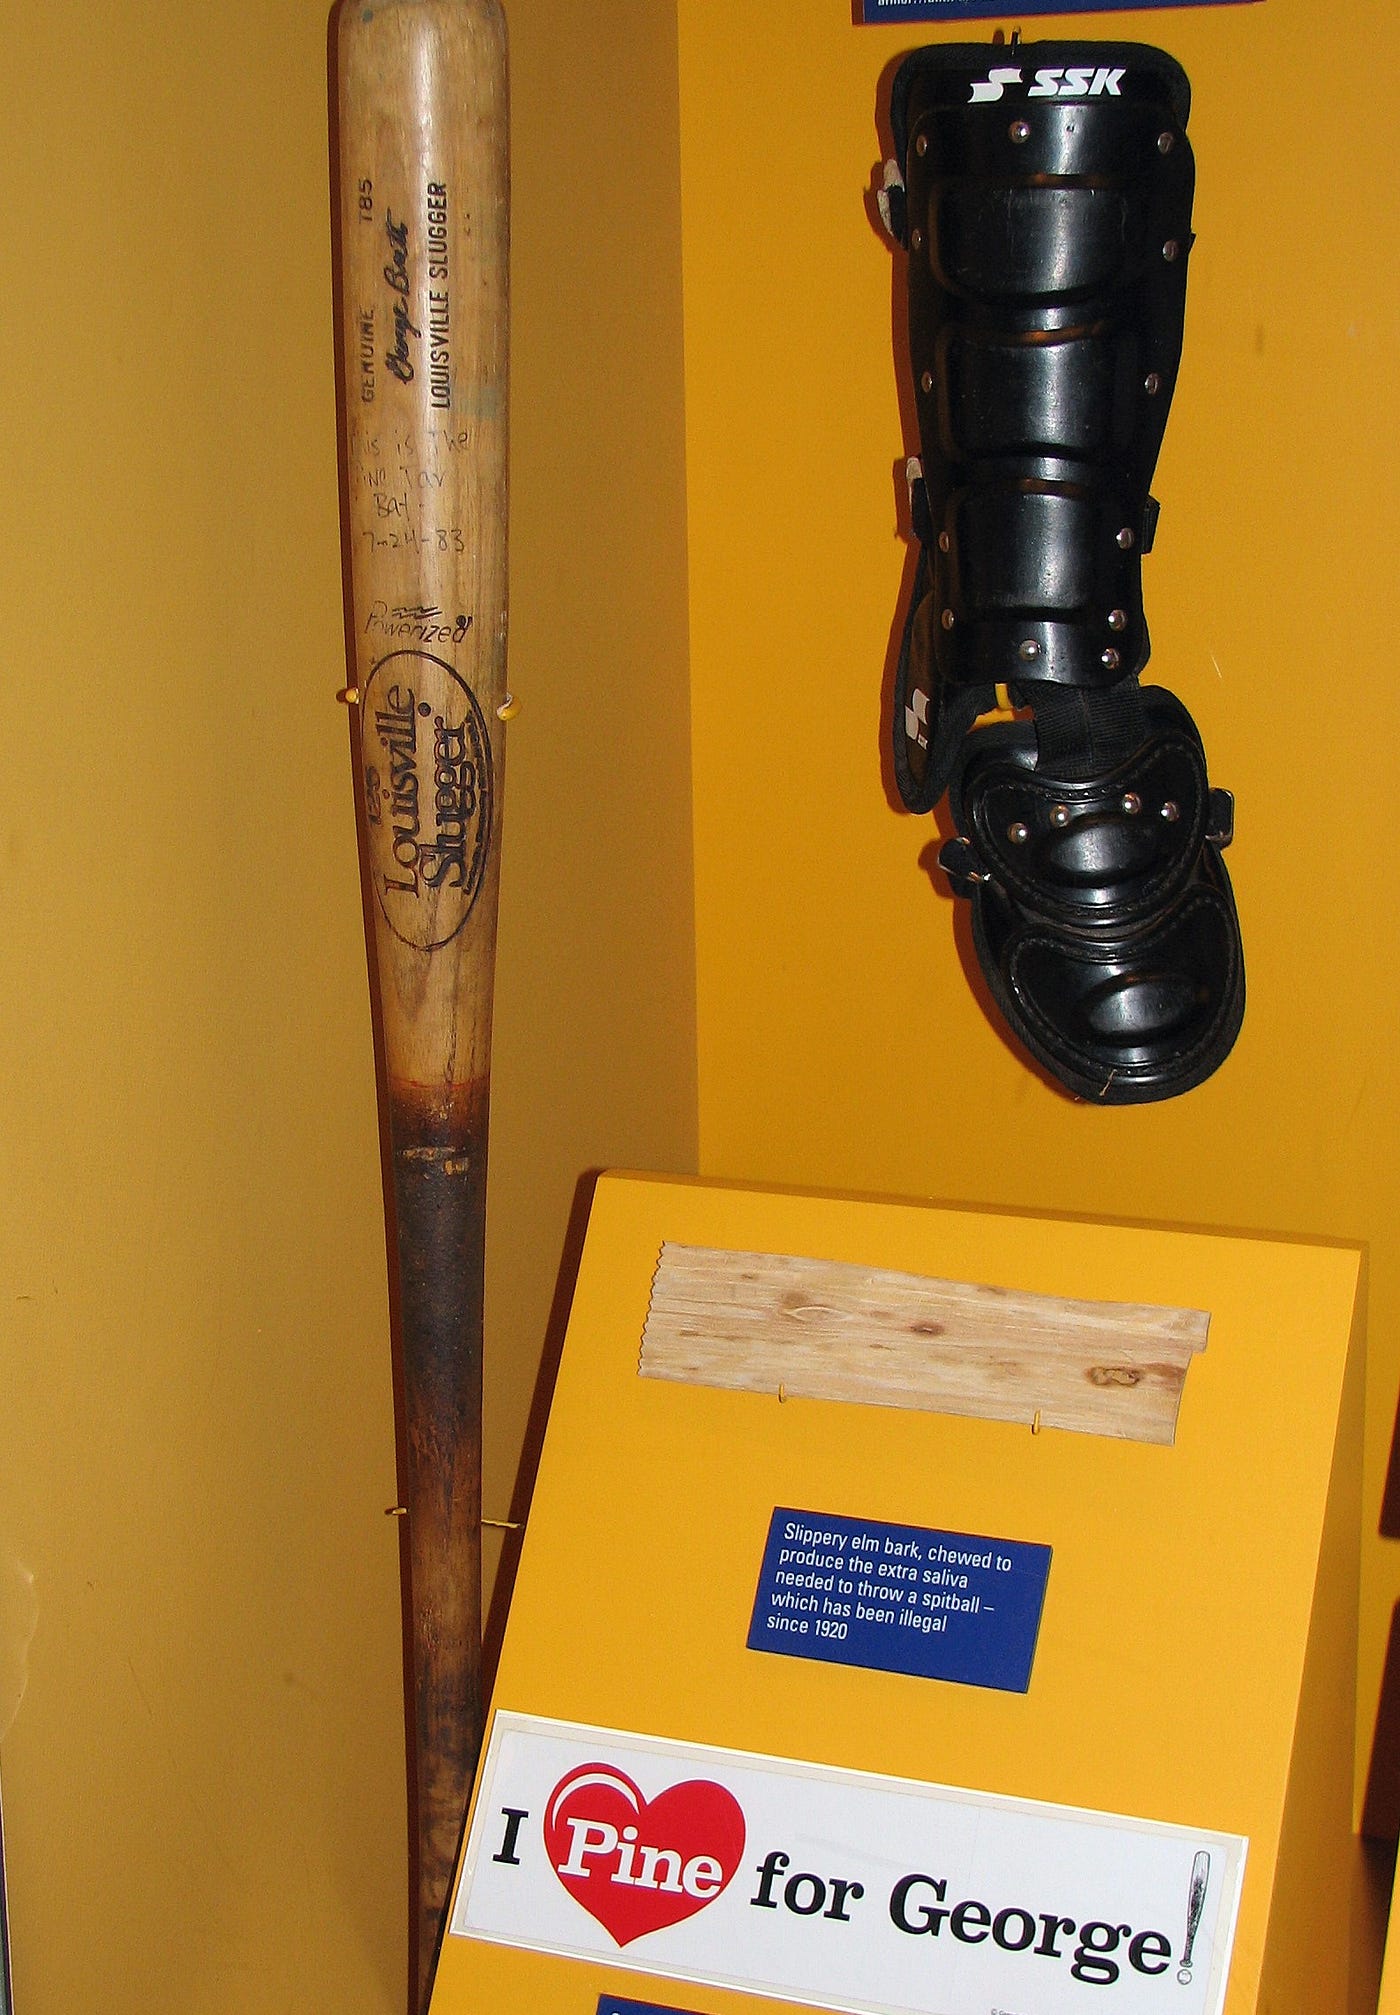 What Is Pine Tar And Why Is It Illegal In Baseball?